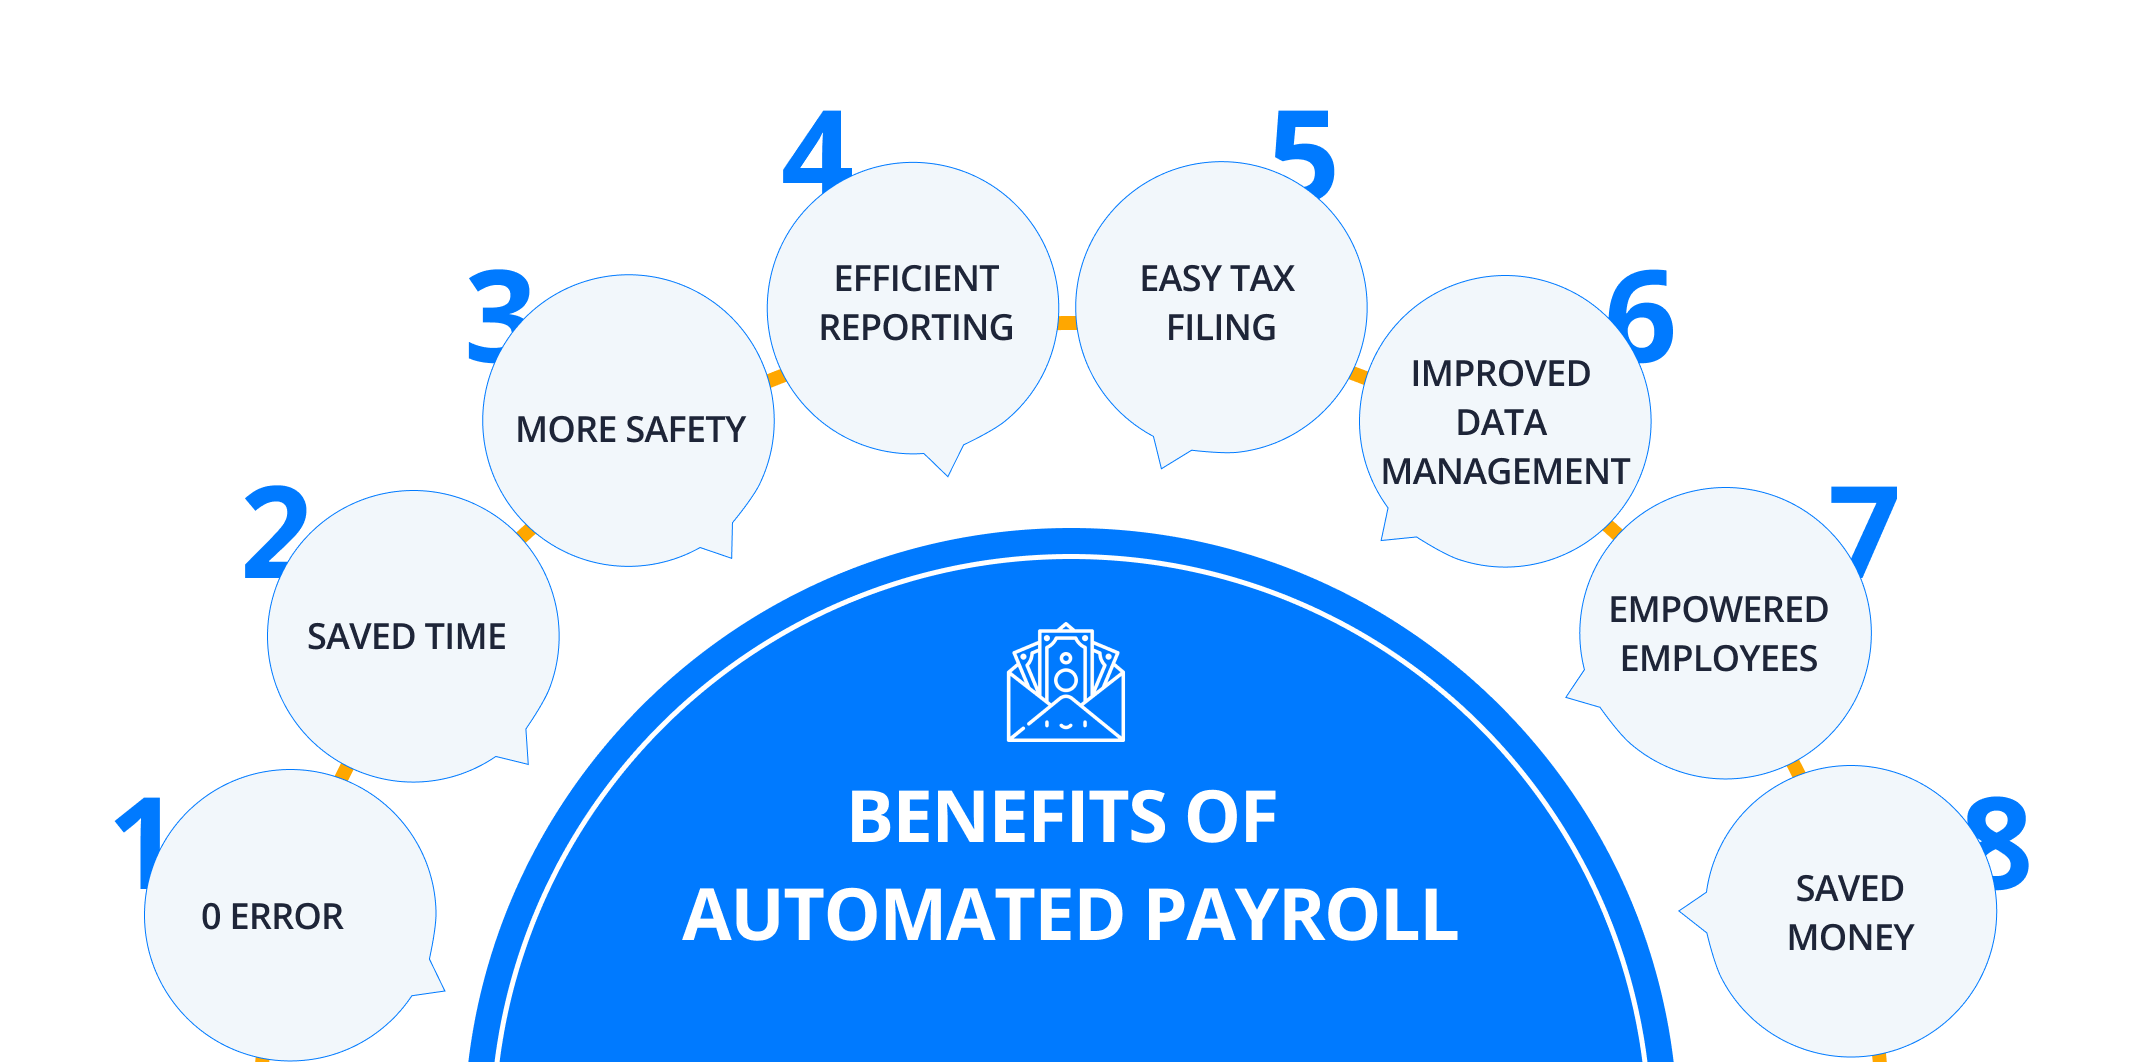 Benefits of Automated Payroll